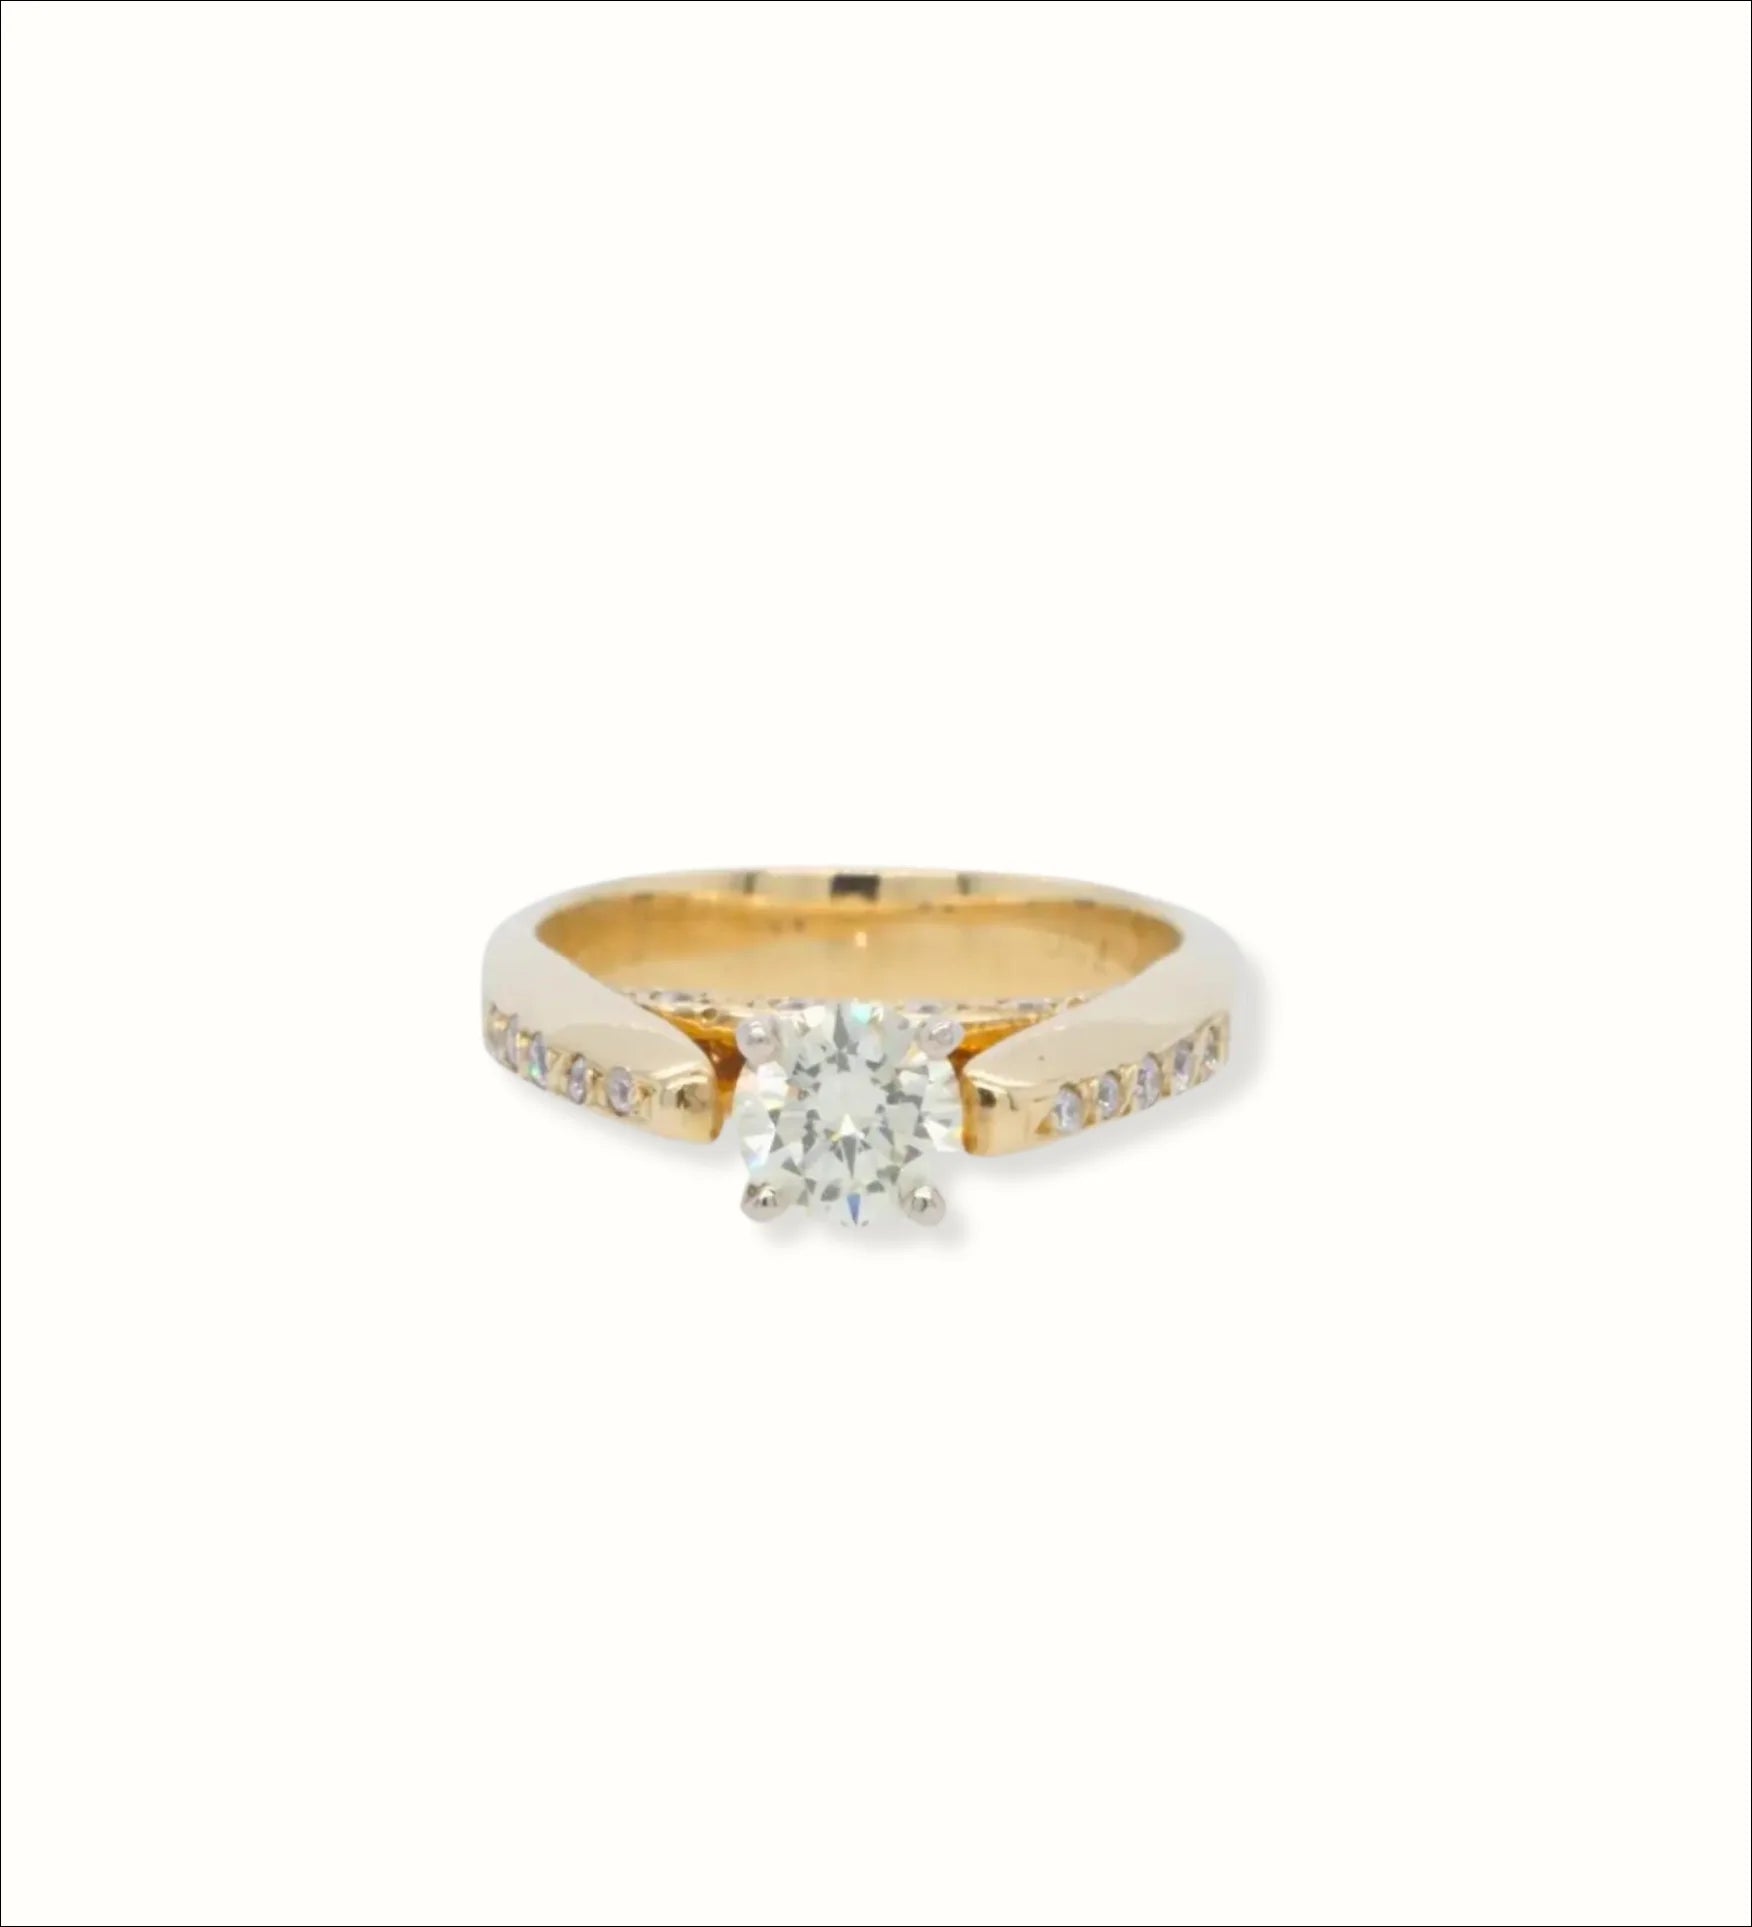 18k Engagement Ring with 0.56ct Diamond | Home page